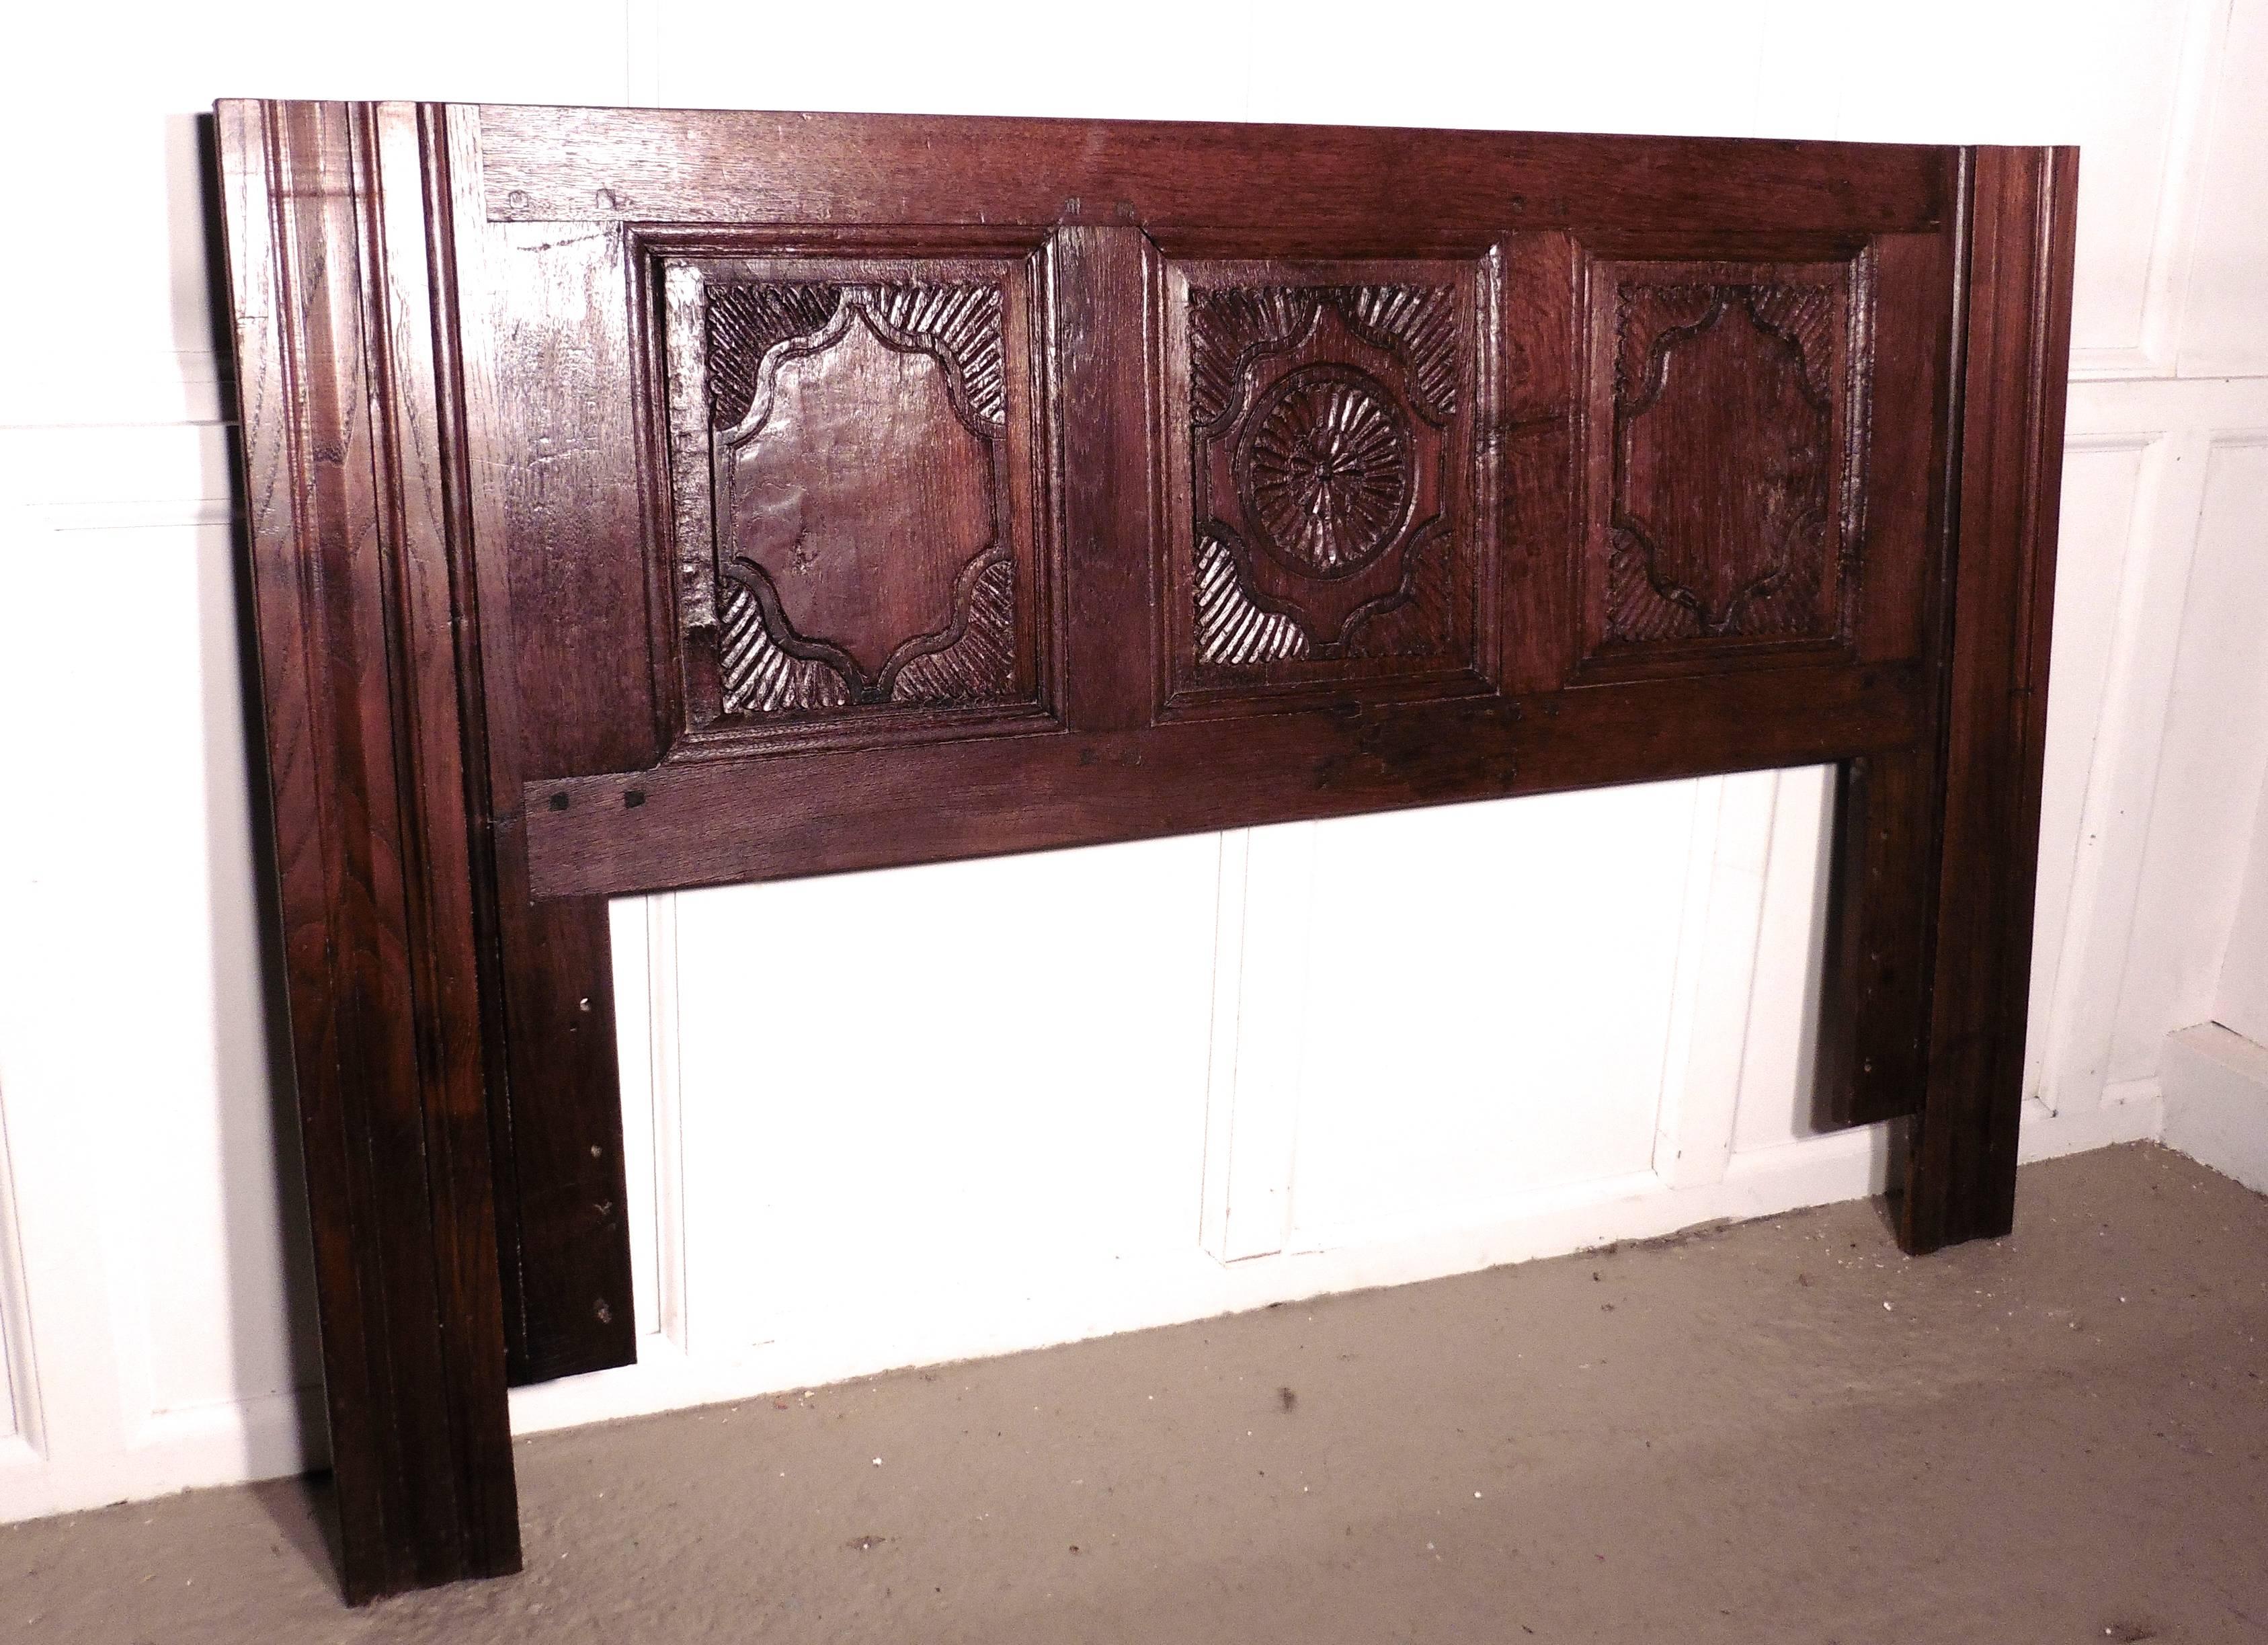 French Gothic carved oak bed head board

This is a lovely old piece, the headboard has been made from a piece of 18th century French carved furniture, the headboard can be fixed to a wall and would be useable with a divan bed or similar to make